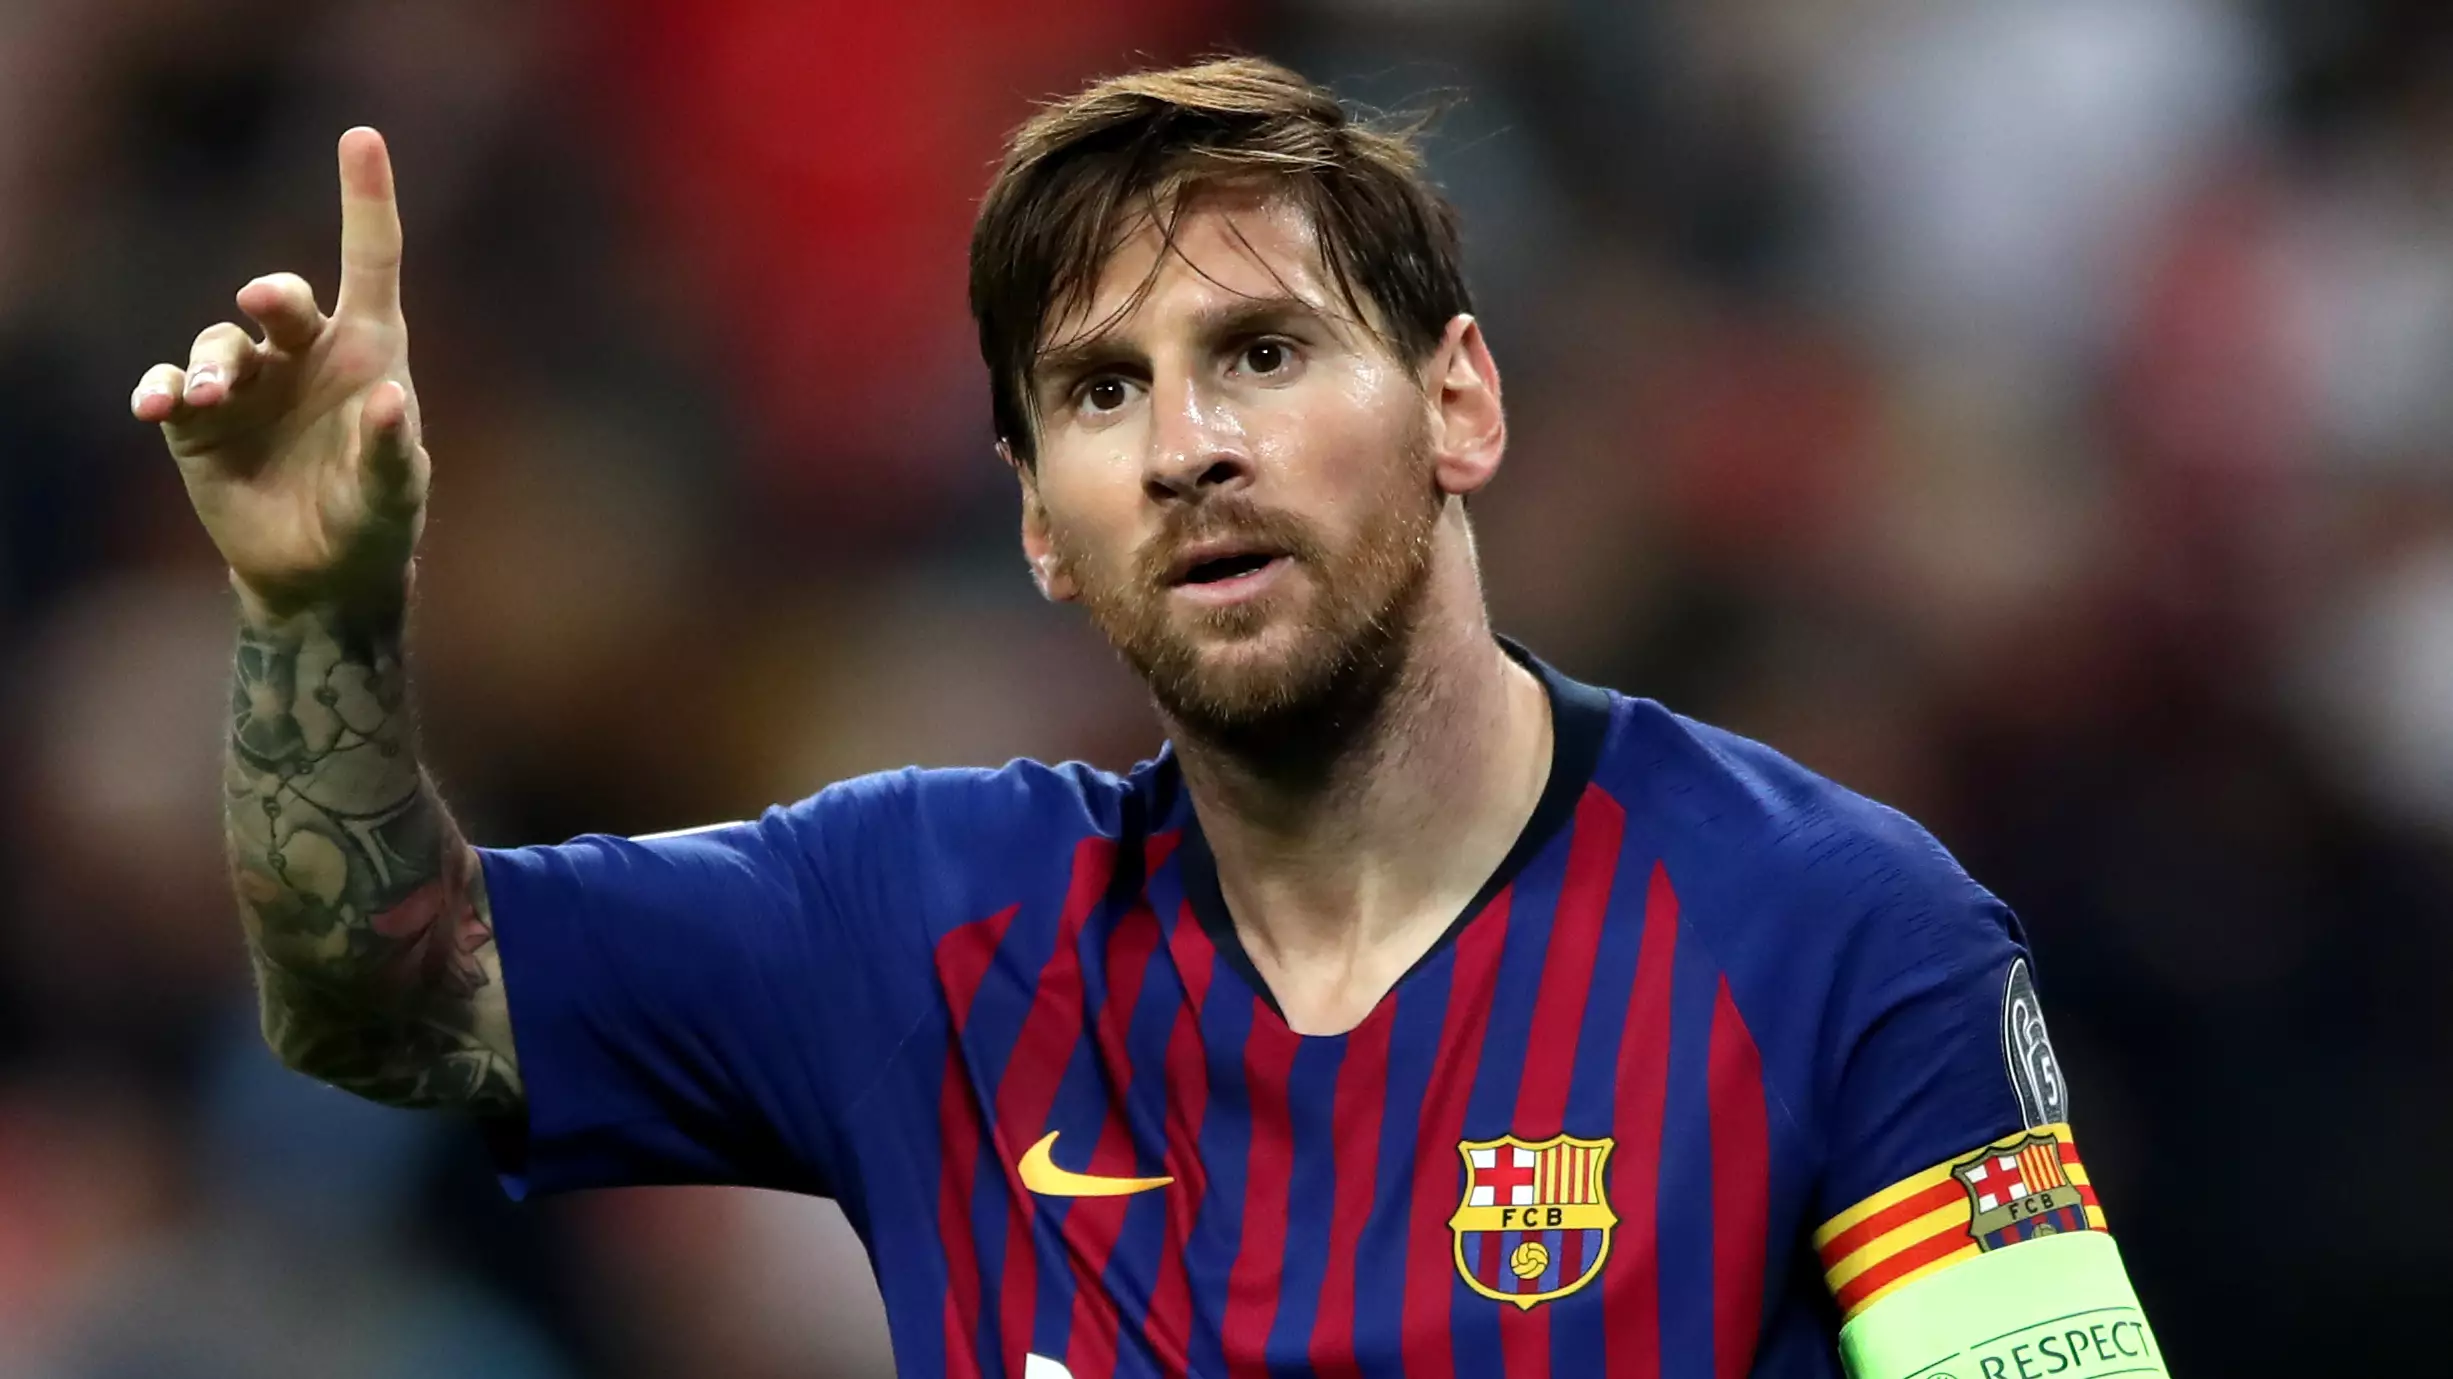 Lionel Messi Responds To La Liga With Official Statement